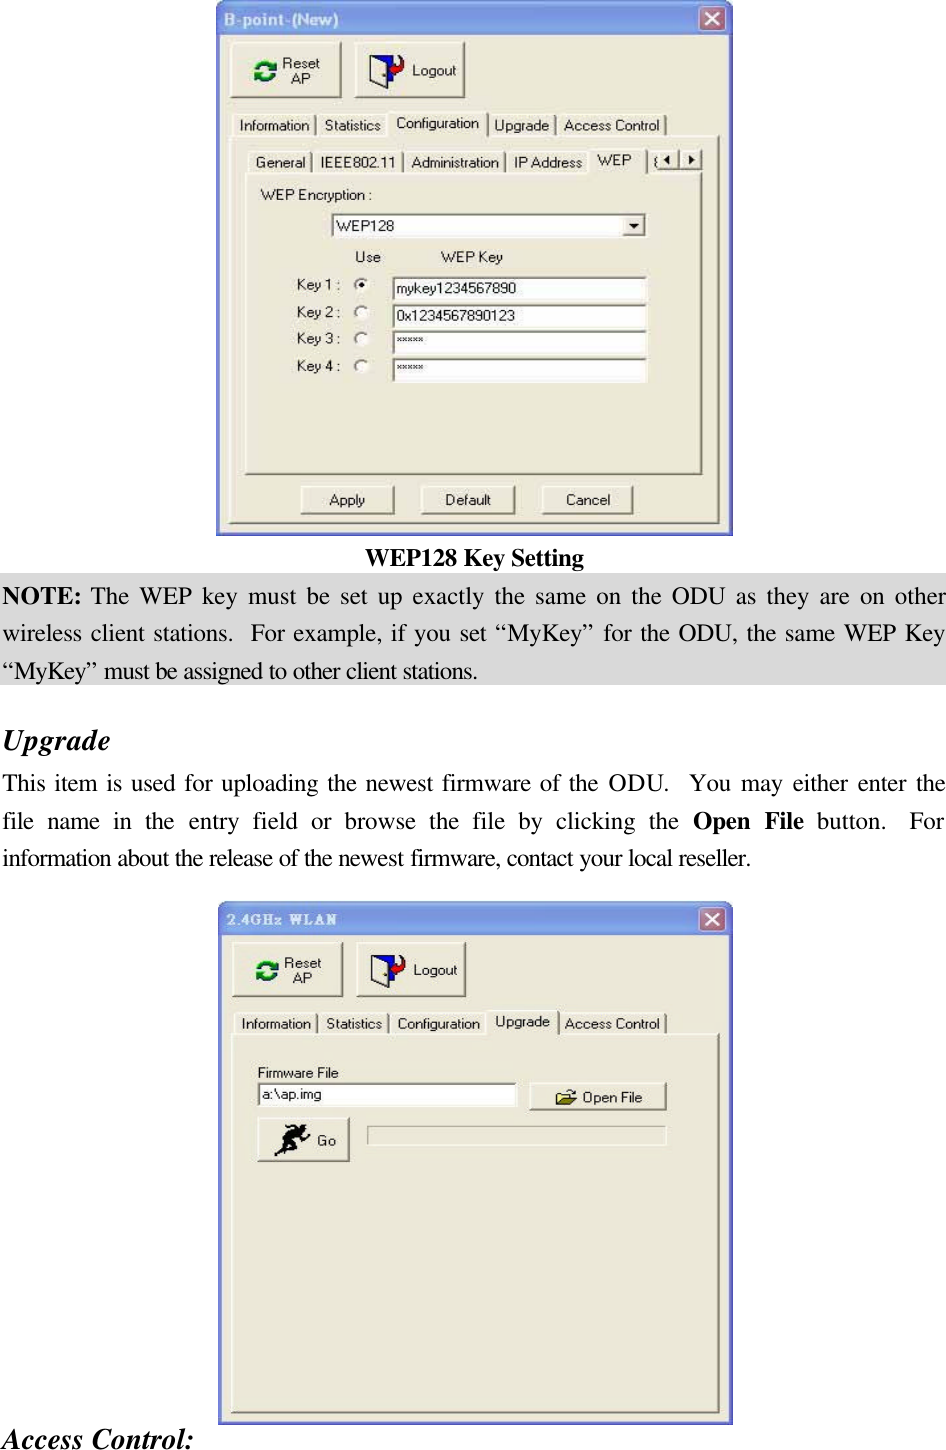  WEP128 Key Setting NOTE: The WEP key must be set up exactly the same on the ODU as they are on other wireless client stations.  For example, if you set “MyKey” for the ODU, the same WEP Key “MyKey” must be assigned to other client stations.  Upgrade This item is used for uploading the newest firmware of the ODU.  You may either enter the file name in the entry field or browse the file by clicking the Open File button.  For information about the release of the newest firmware, contact your local reseller.     Access Control: 